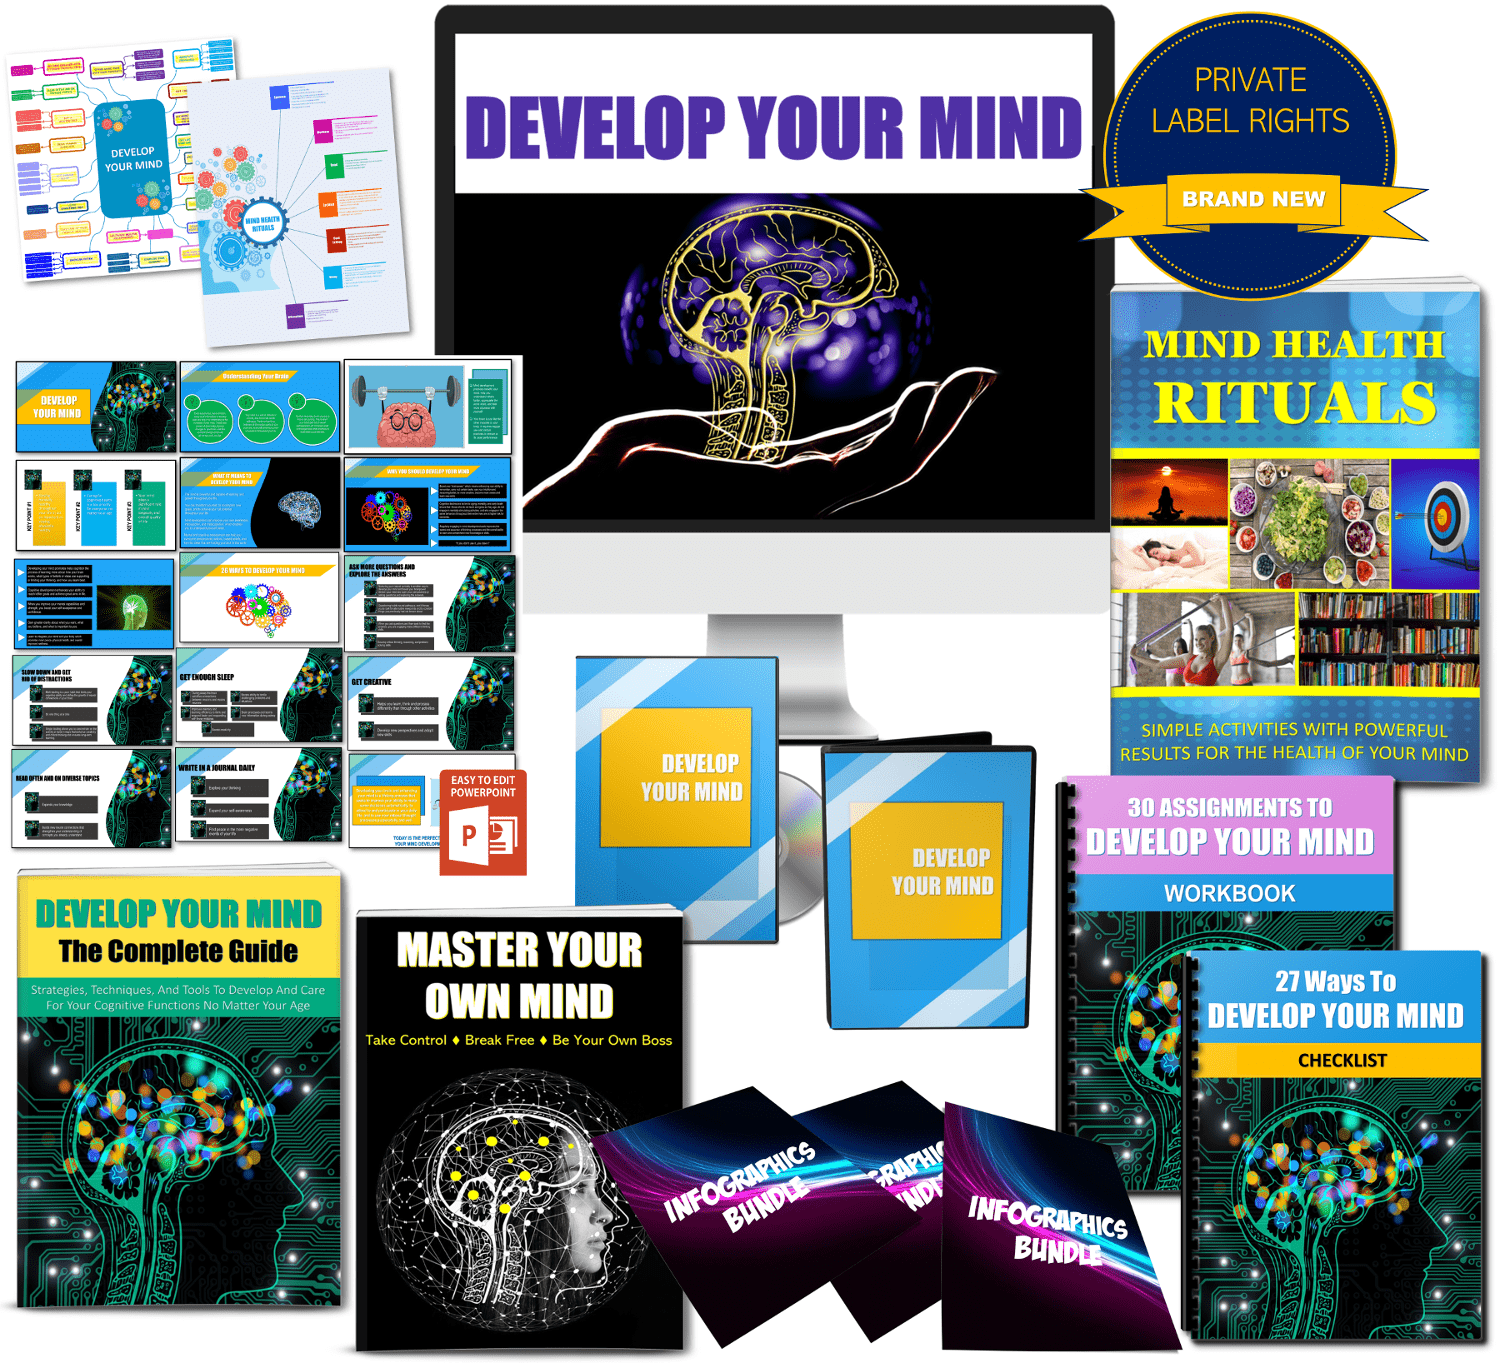 Develop Your Mind Giant Content Pack With PLR Rights